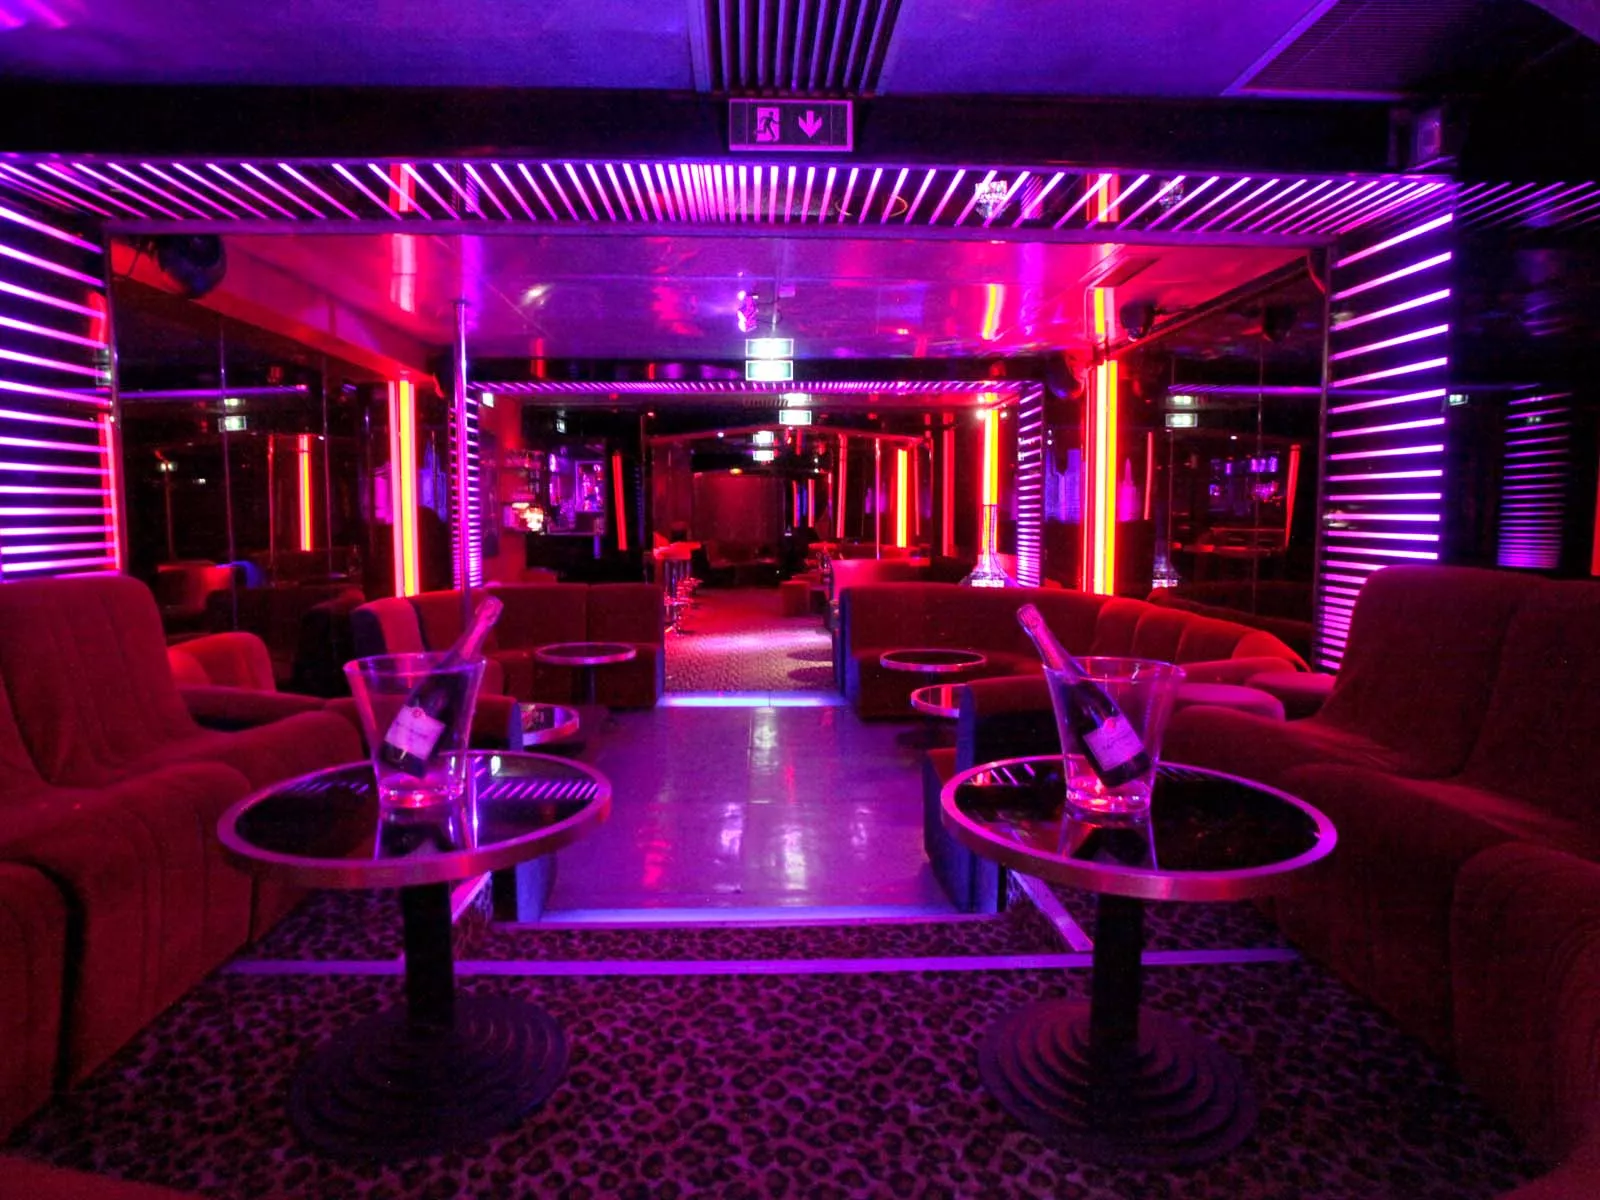 G-Spot Club in France, Europe  - Rated 0.7